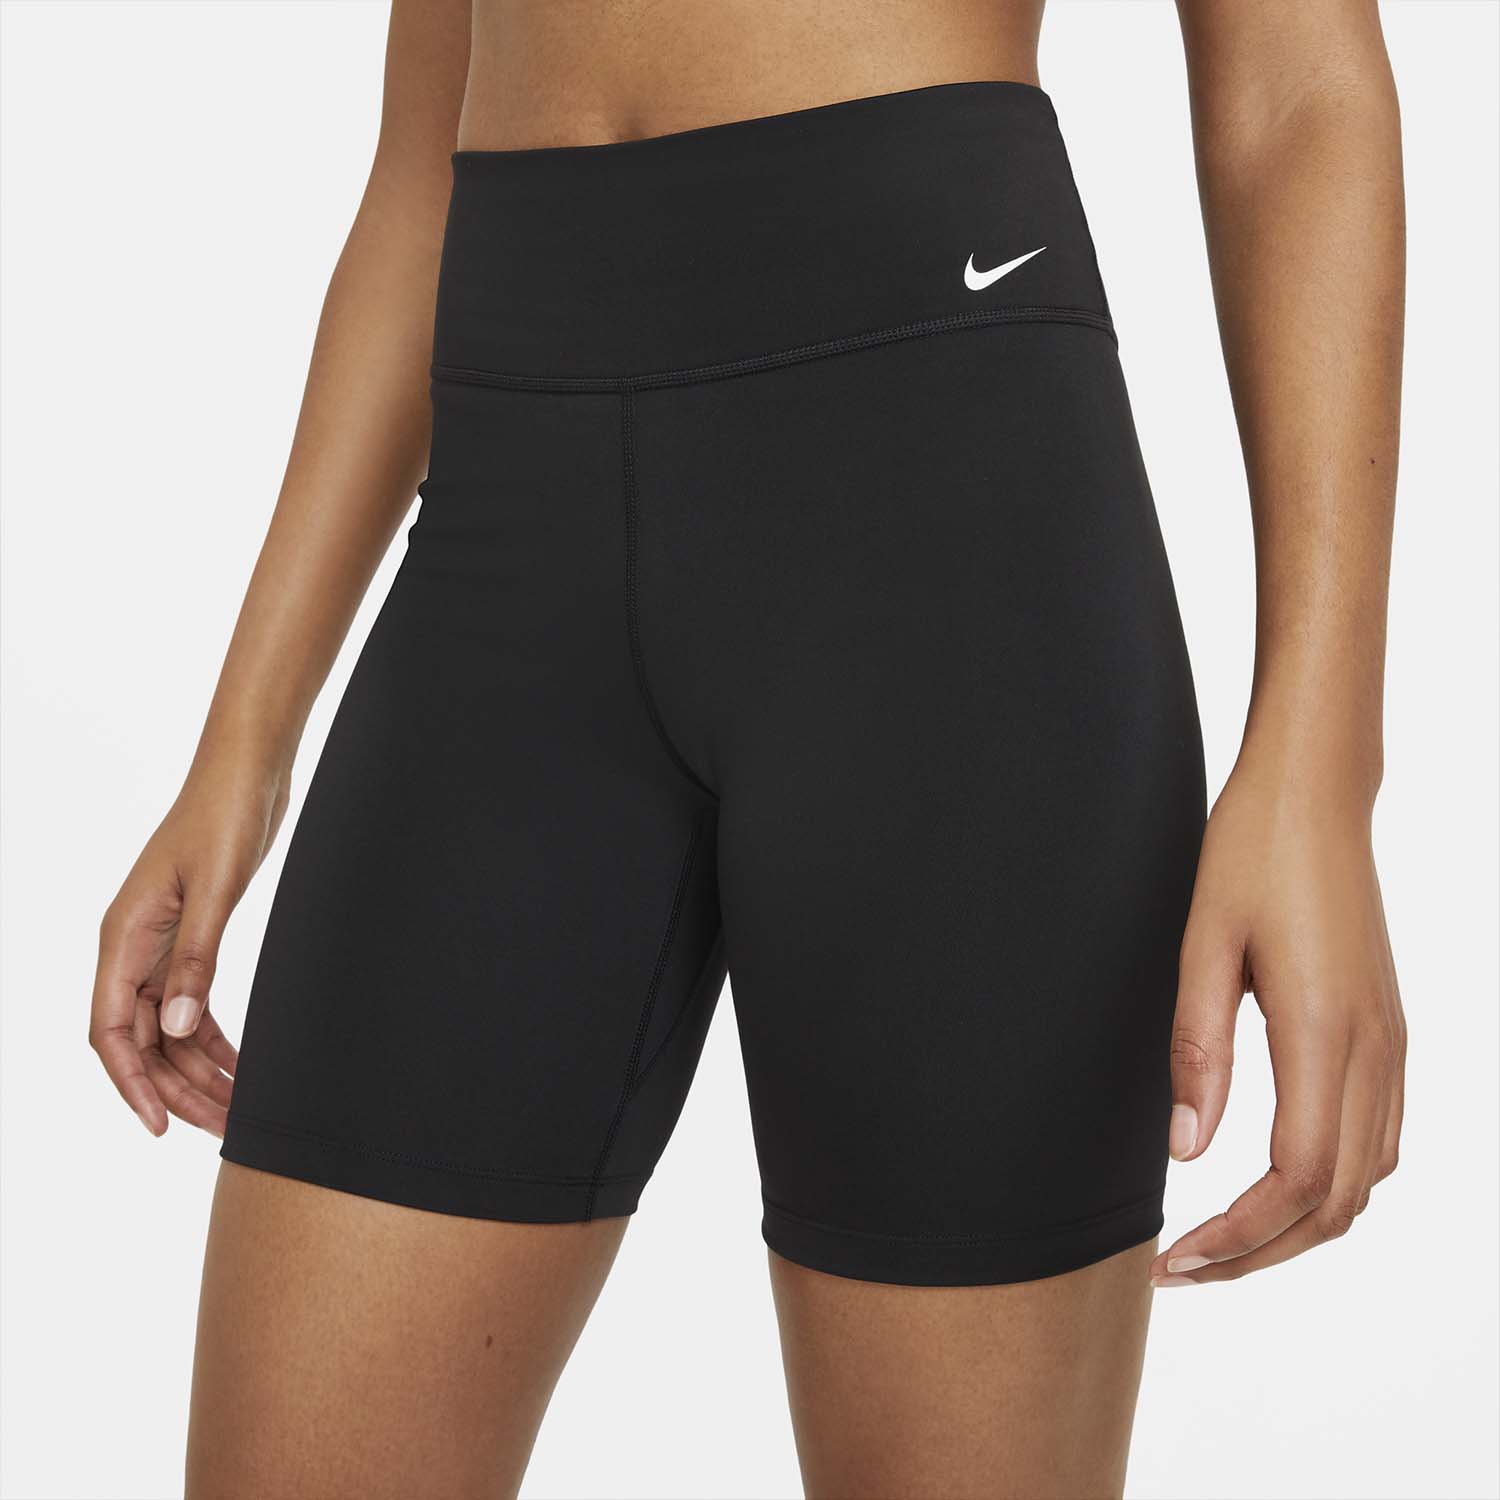 NIKE Bike Shorts for Workouts | Be Ready For Summer